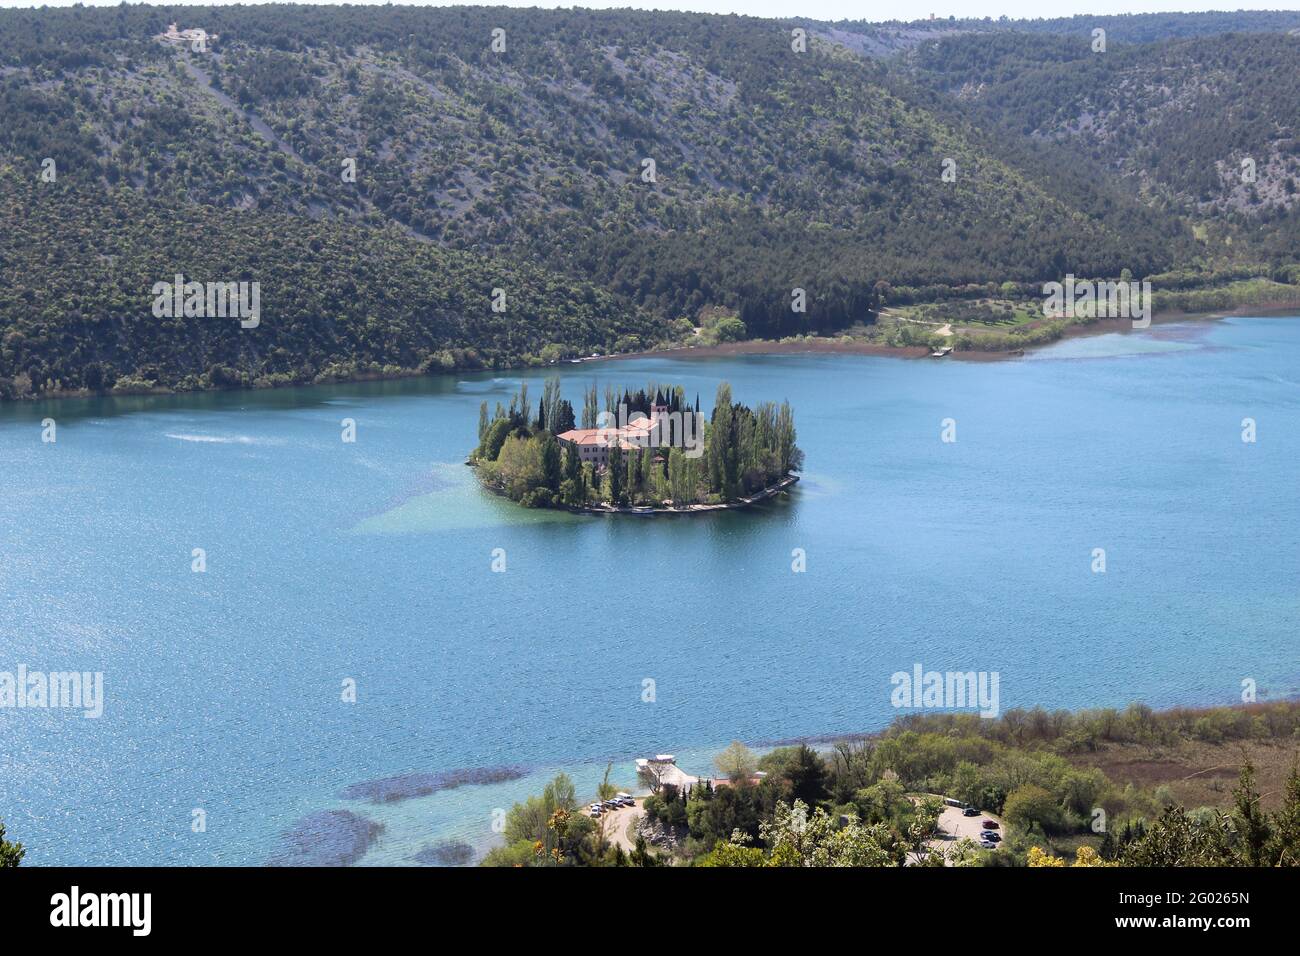 Tiny island of Visovac in the Krka river in Croatia settled by Franciscan monks Stock Photo